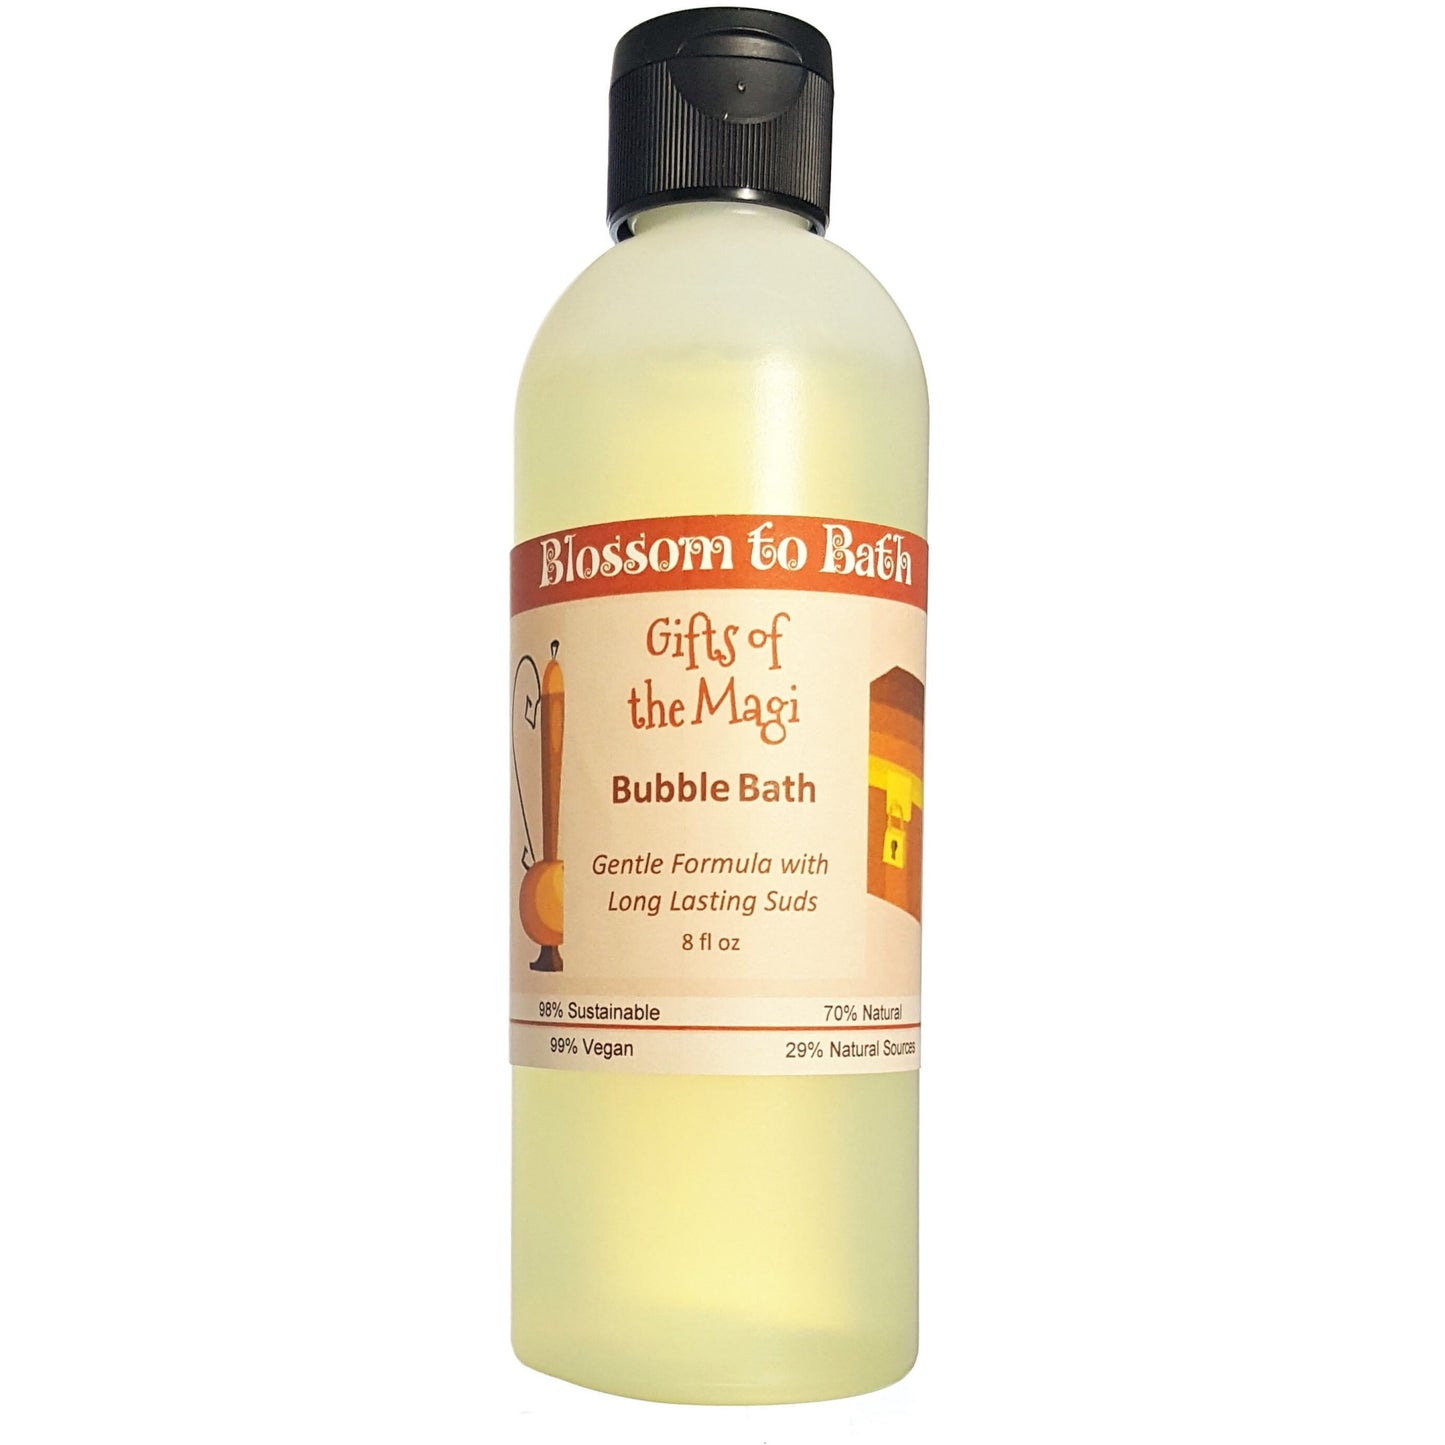 Buy Blossom to Bath Gifts of the Magi Bubble Bath from Flowersong Soap Studio.  Lively, long lasting  bubbles in a gentle plant based formula for maximum relaxation time  Celebrate the soulful side of the holiday spirit with warm spices and incense.